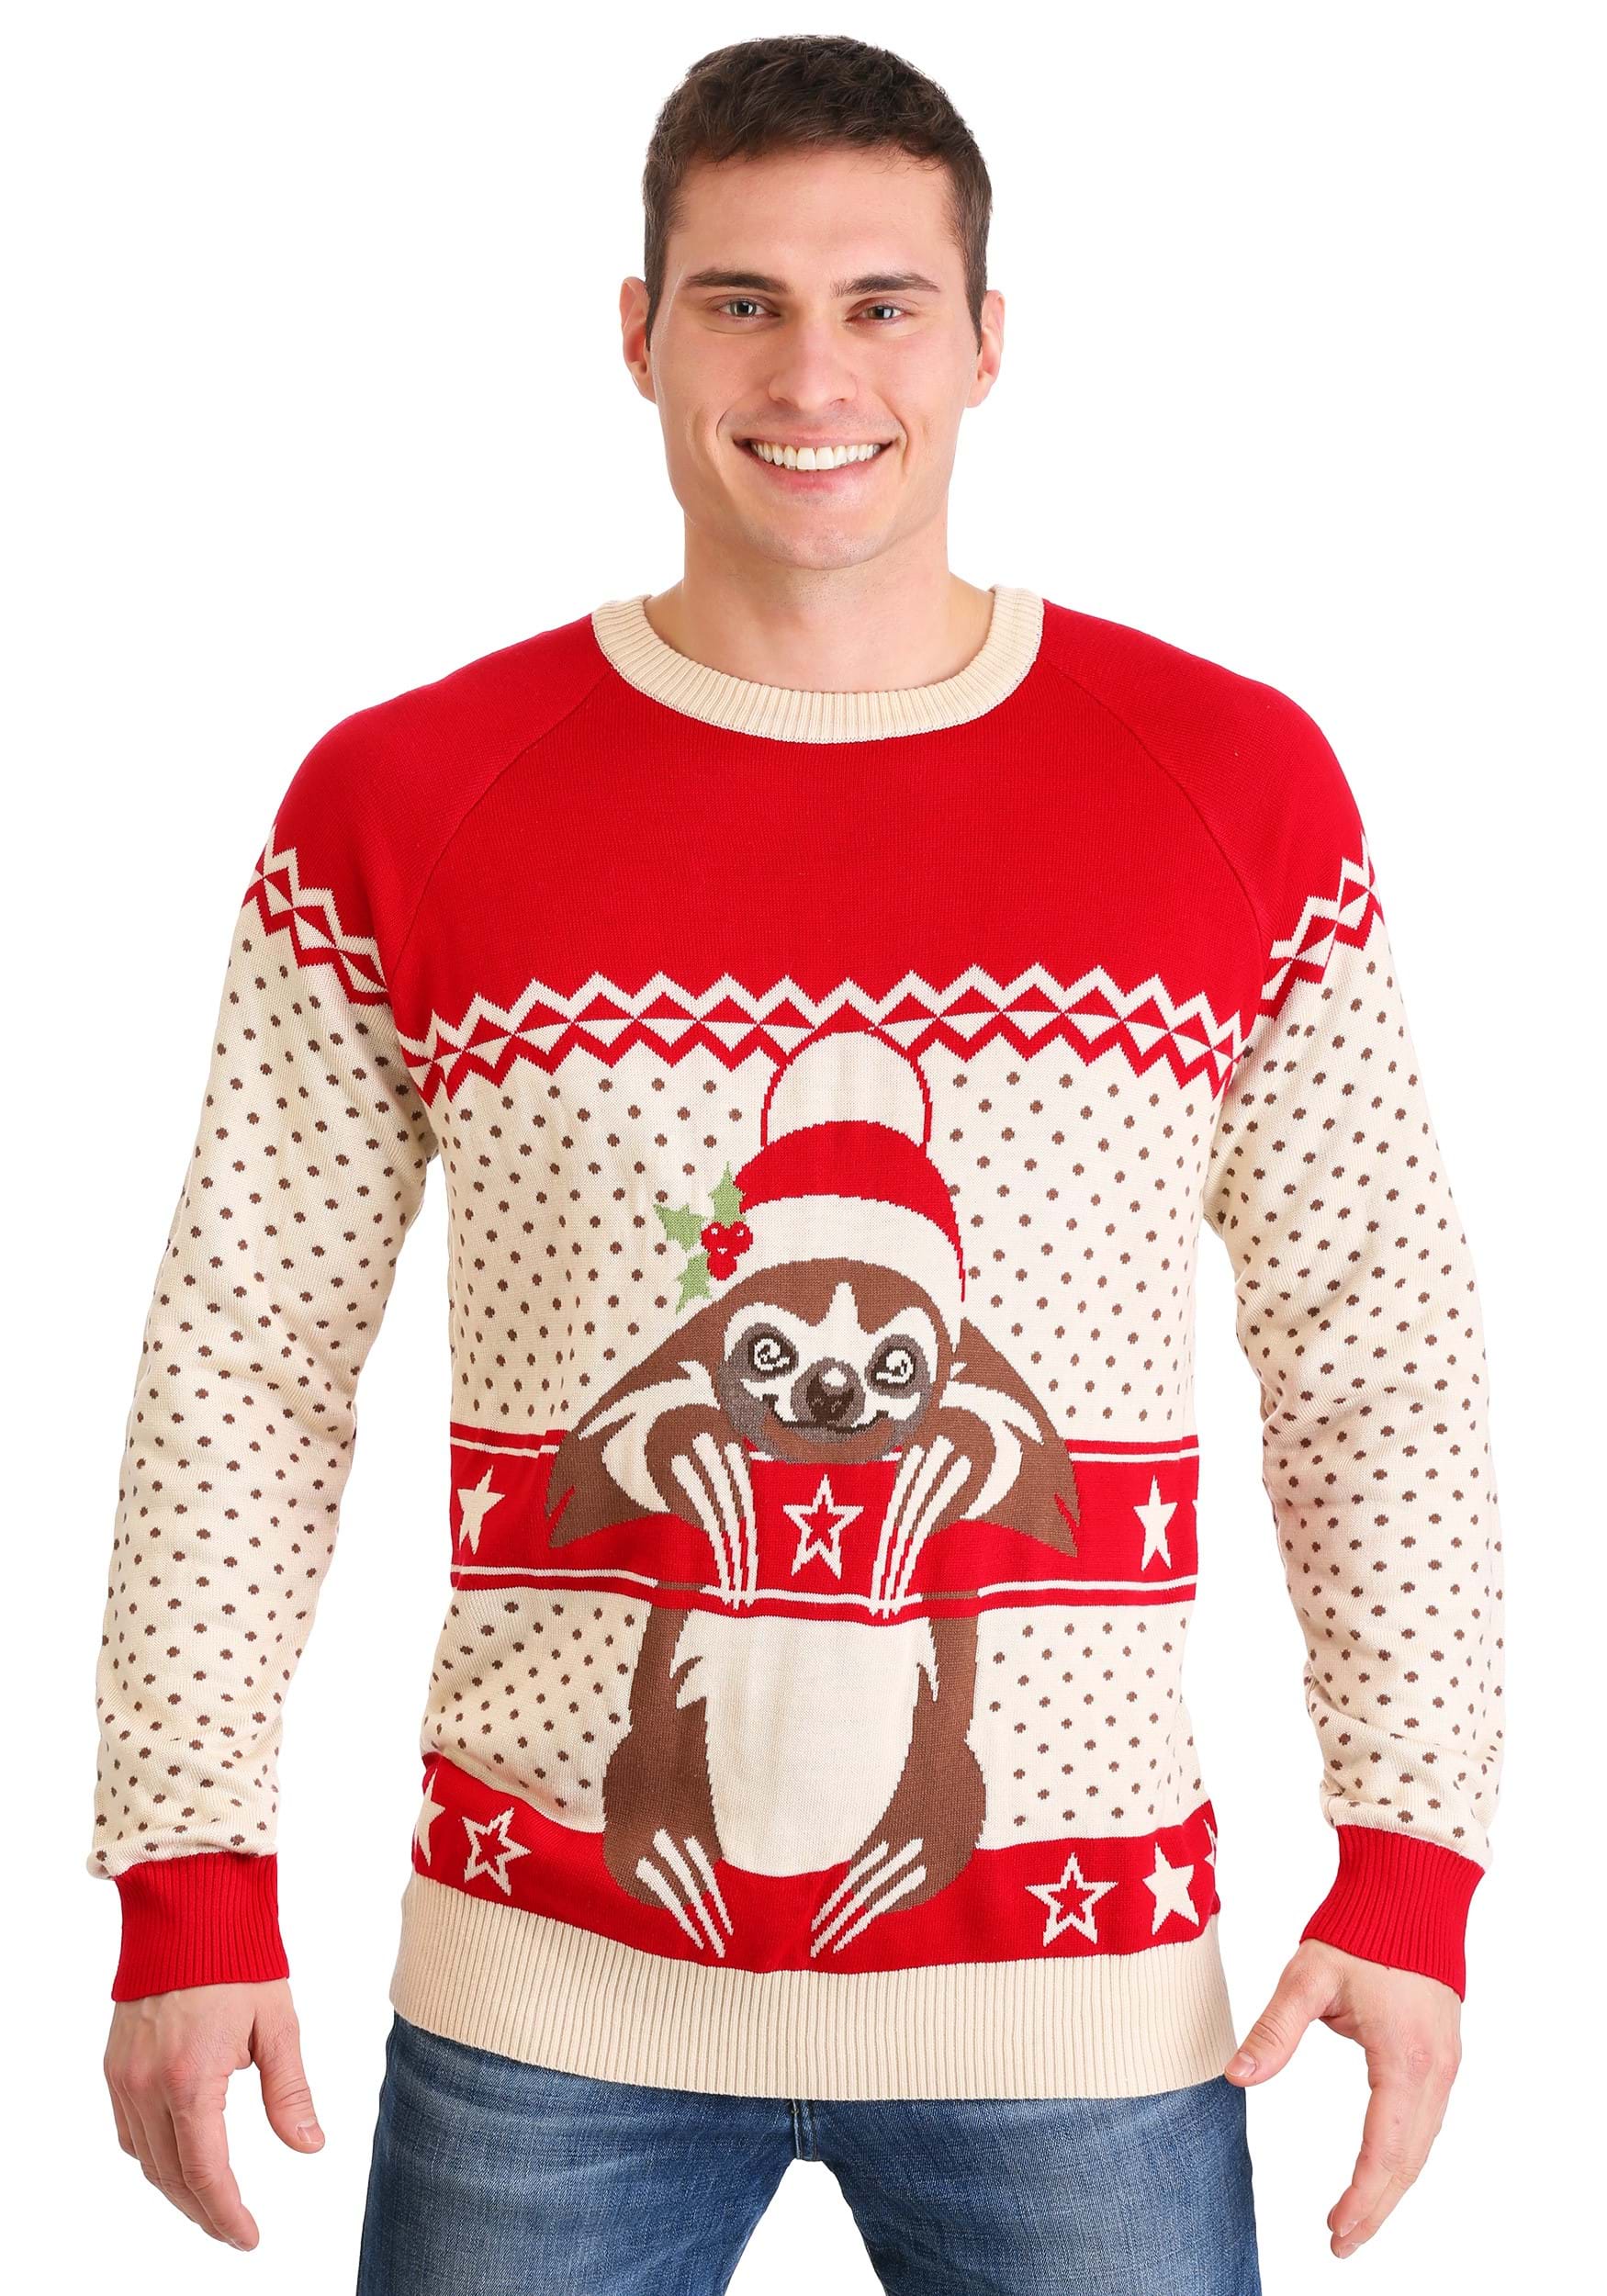 Photos - Fancy Dress Christmas FUN Wear  Sloth Ugly Sweater |  Sweater Brown/Red FU 